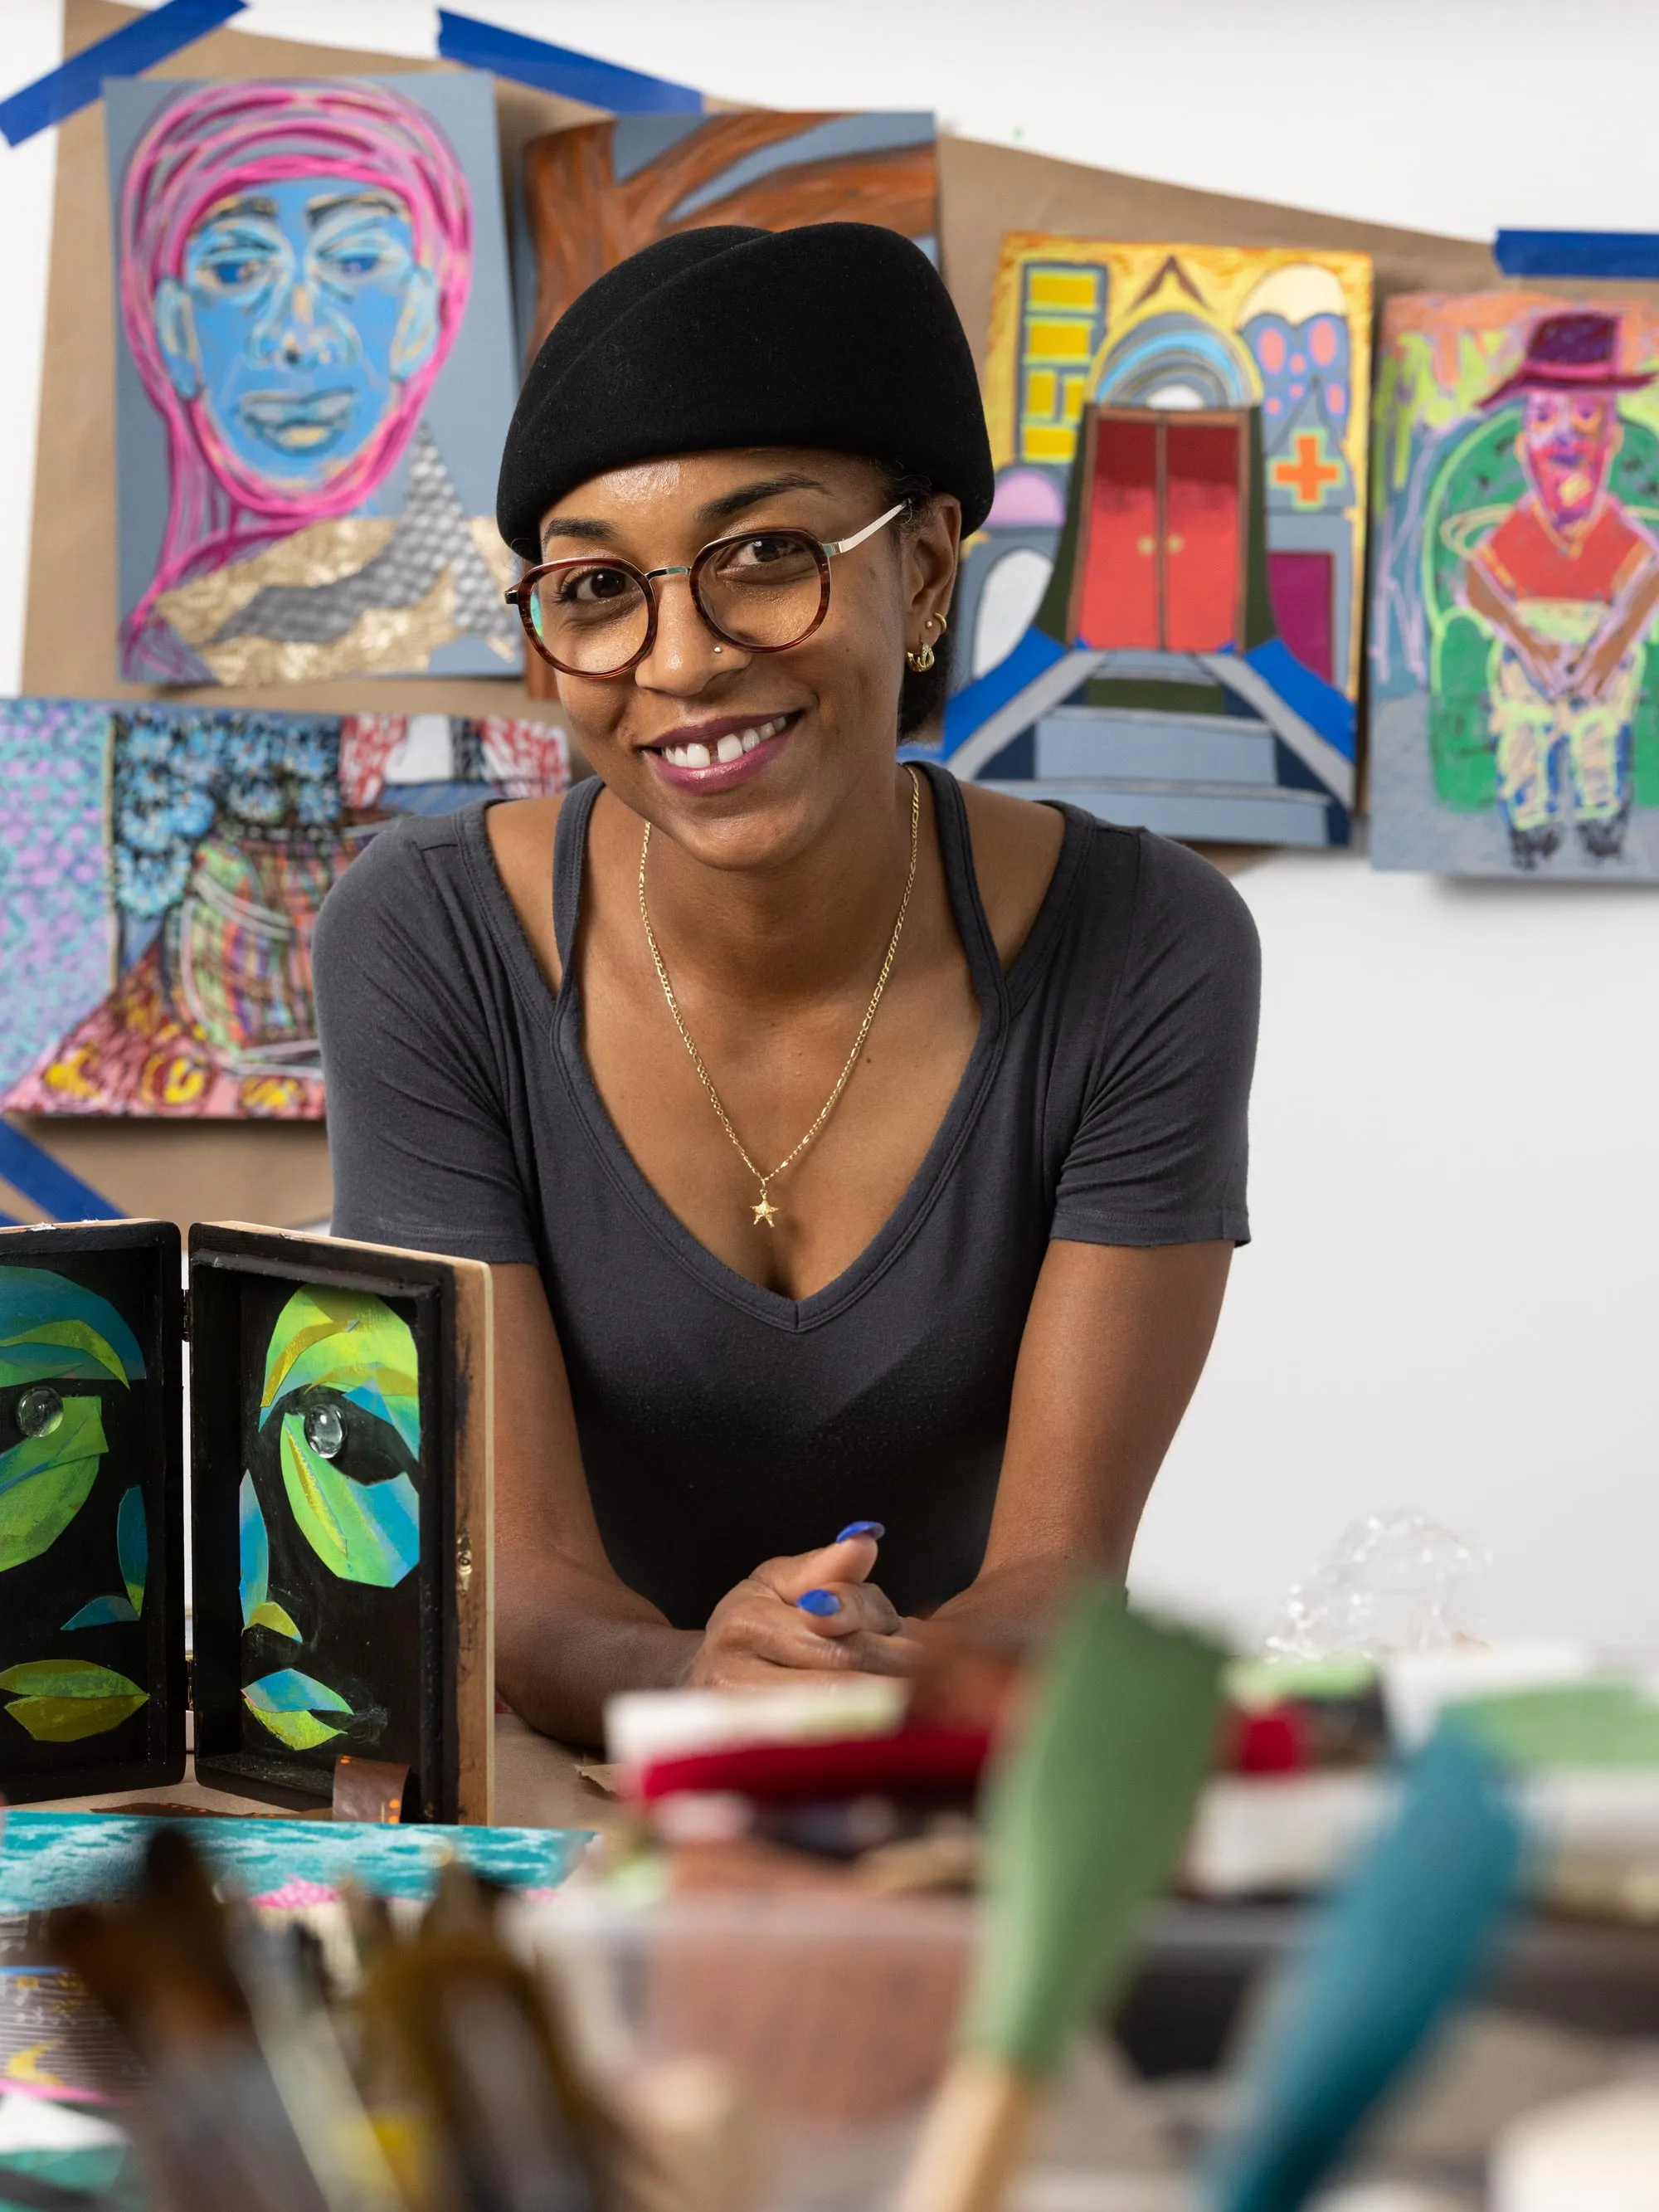 Tiffany Lawson, a Black woman wearing a hat, round glasses and a friendly smile, leans on her work table. In front of her are all kinds of supplies and works in progress and on the wall behind her are paintings she created on paper bags. They include people, faces and scenes in unexpected colors. 